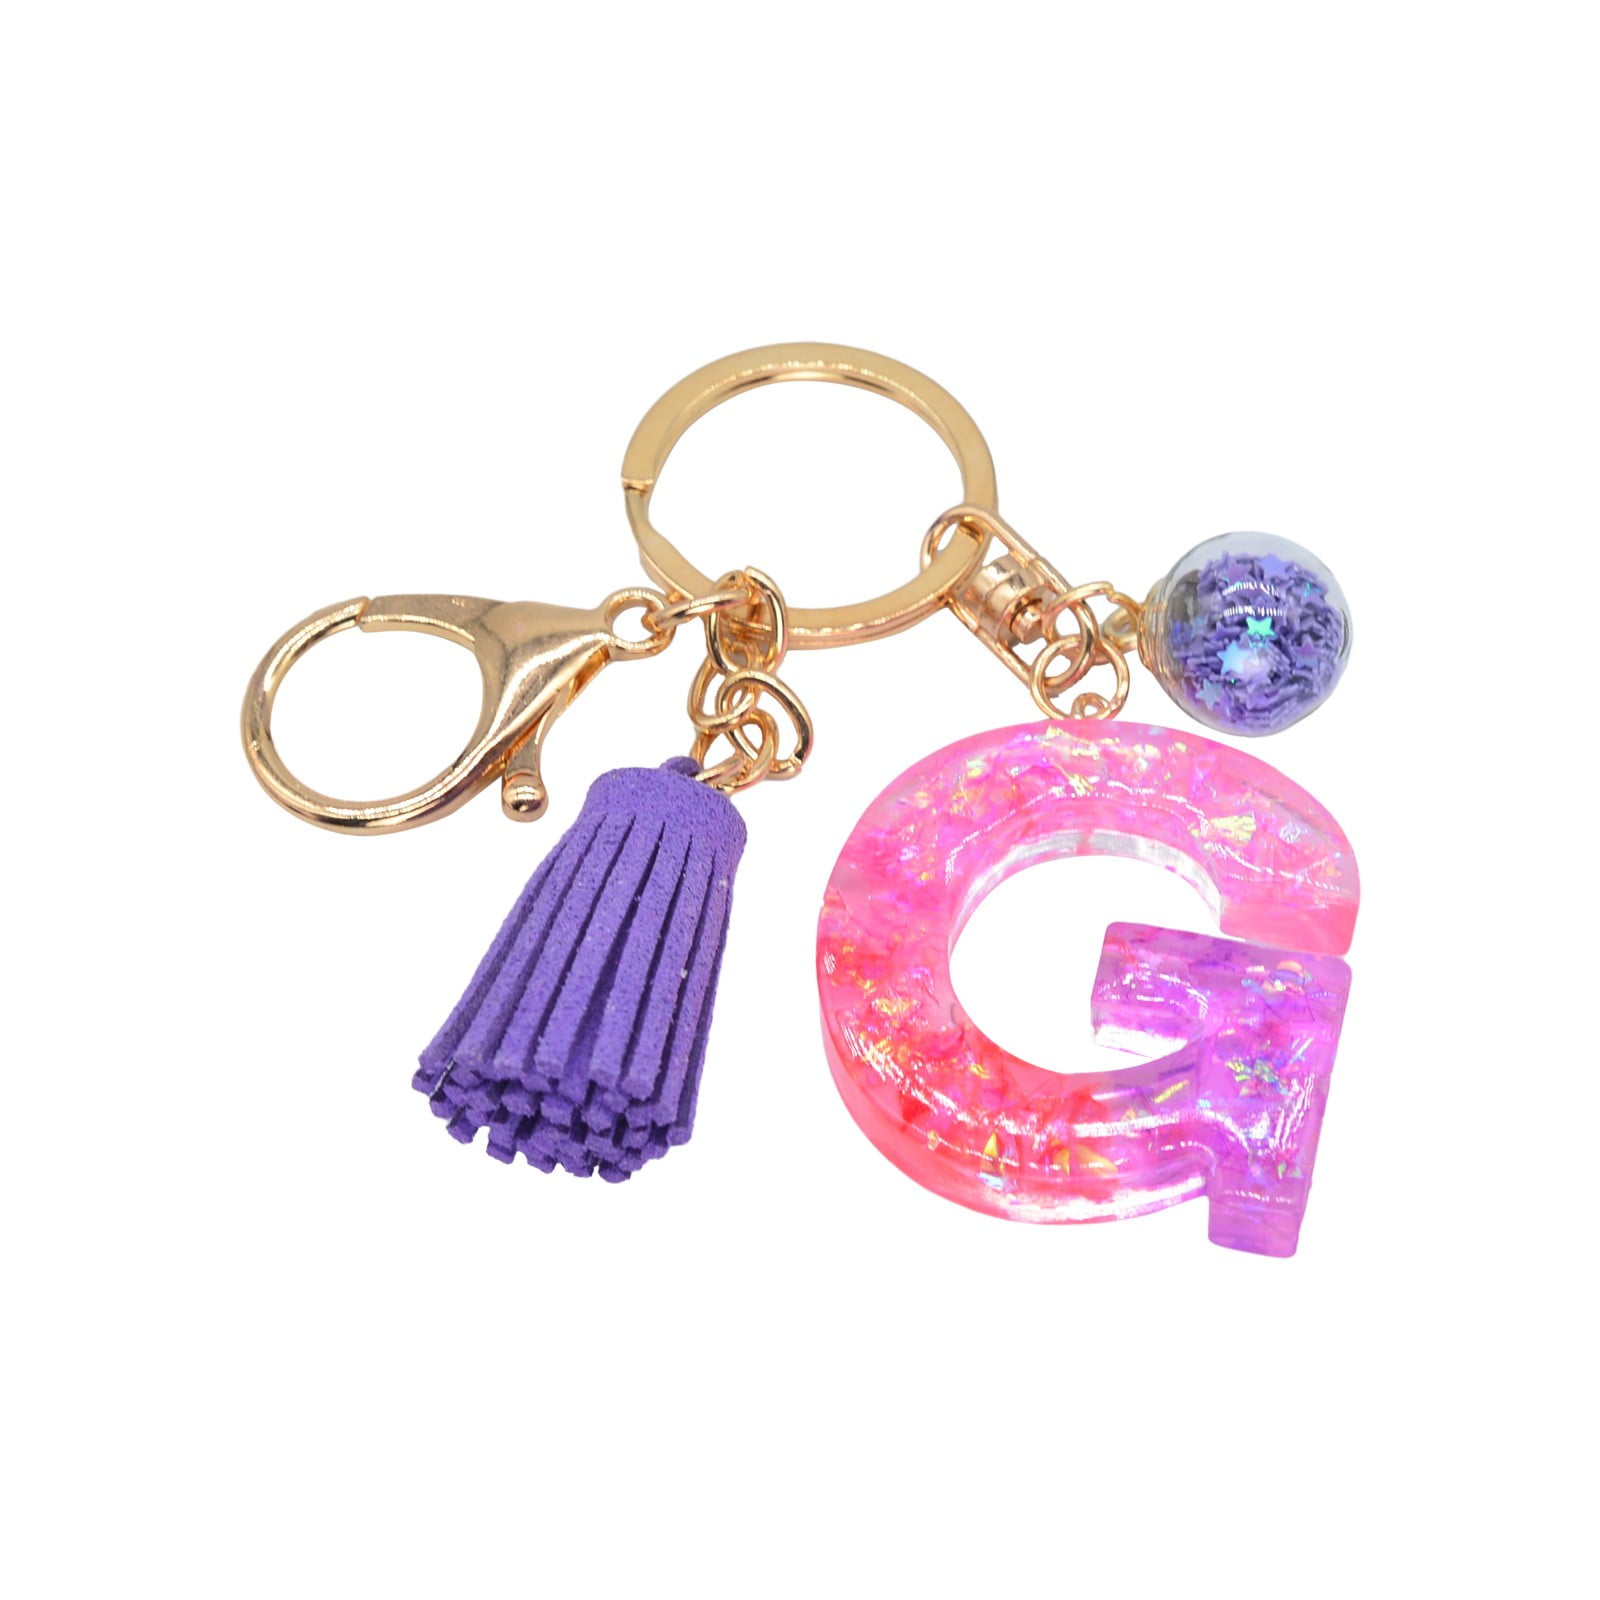 AMAV Fashion Time Love Crystal Key Chain Making Kit, Makes 4 Beautiful Key  Chains with Sparkling Glitter and Crystal that Together Spell LOVEs,  Children Ages 8 and Up 